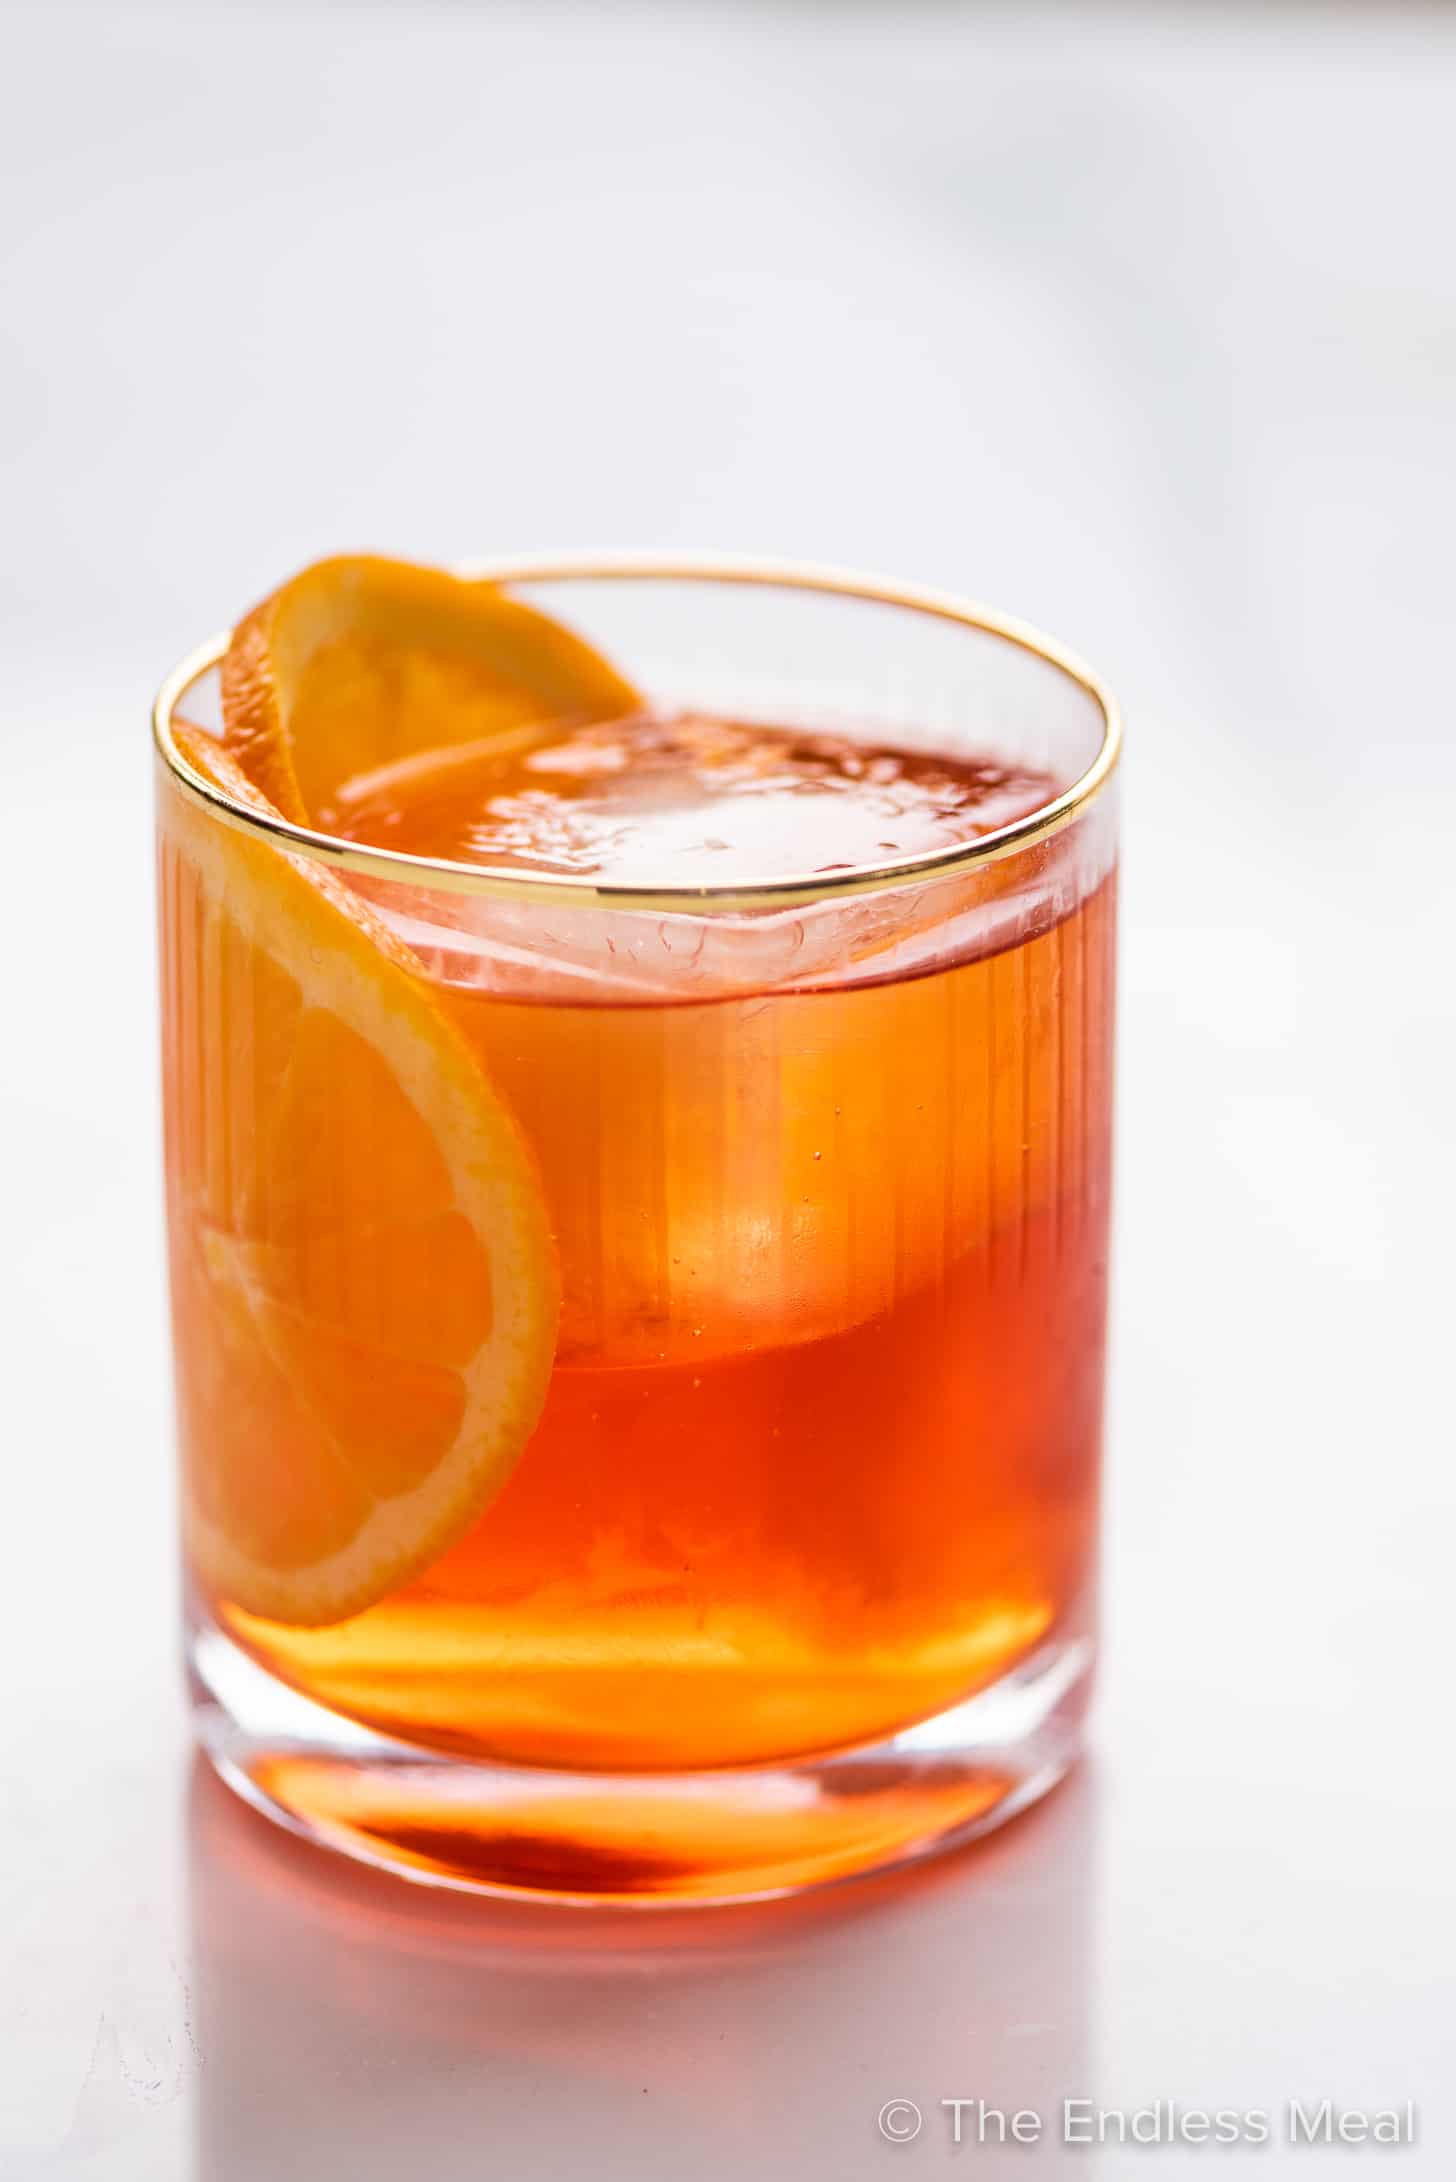 a glass of Aperol Negroni with an orange slice